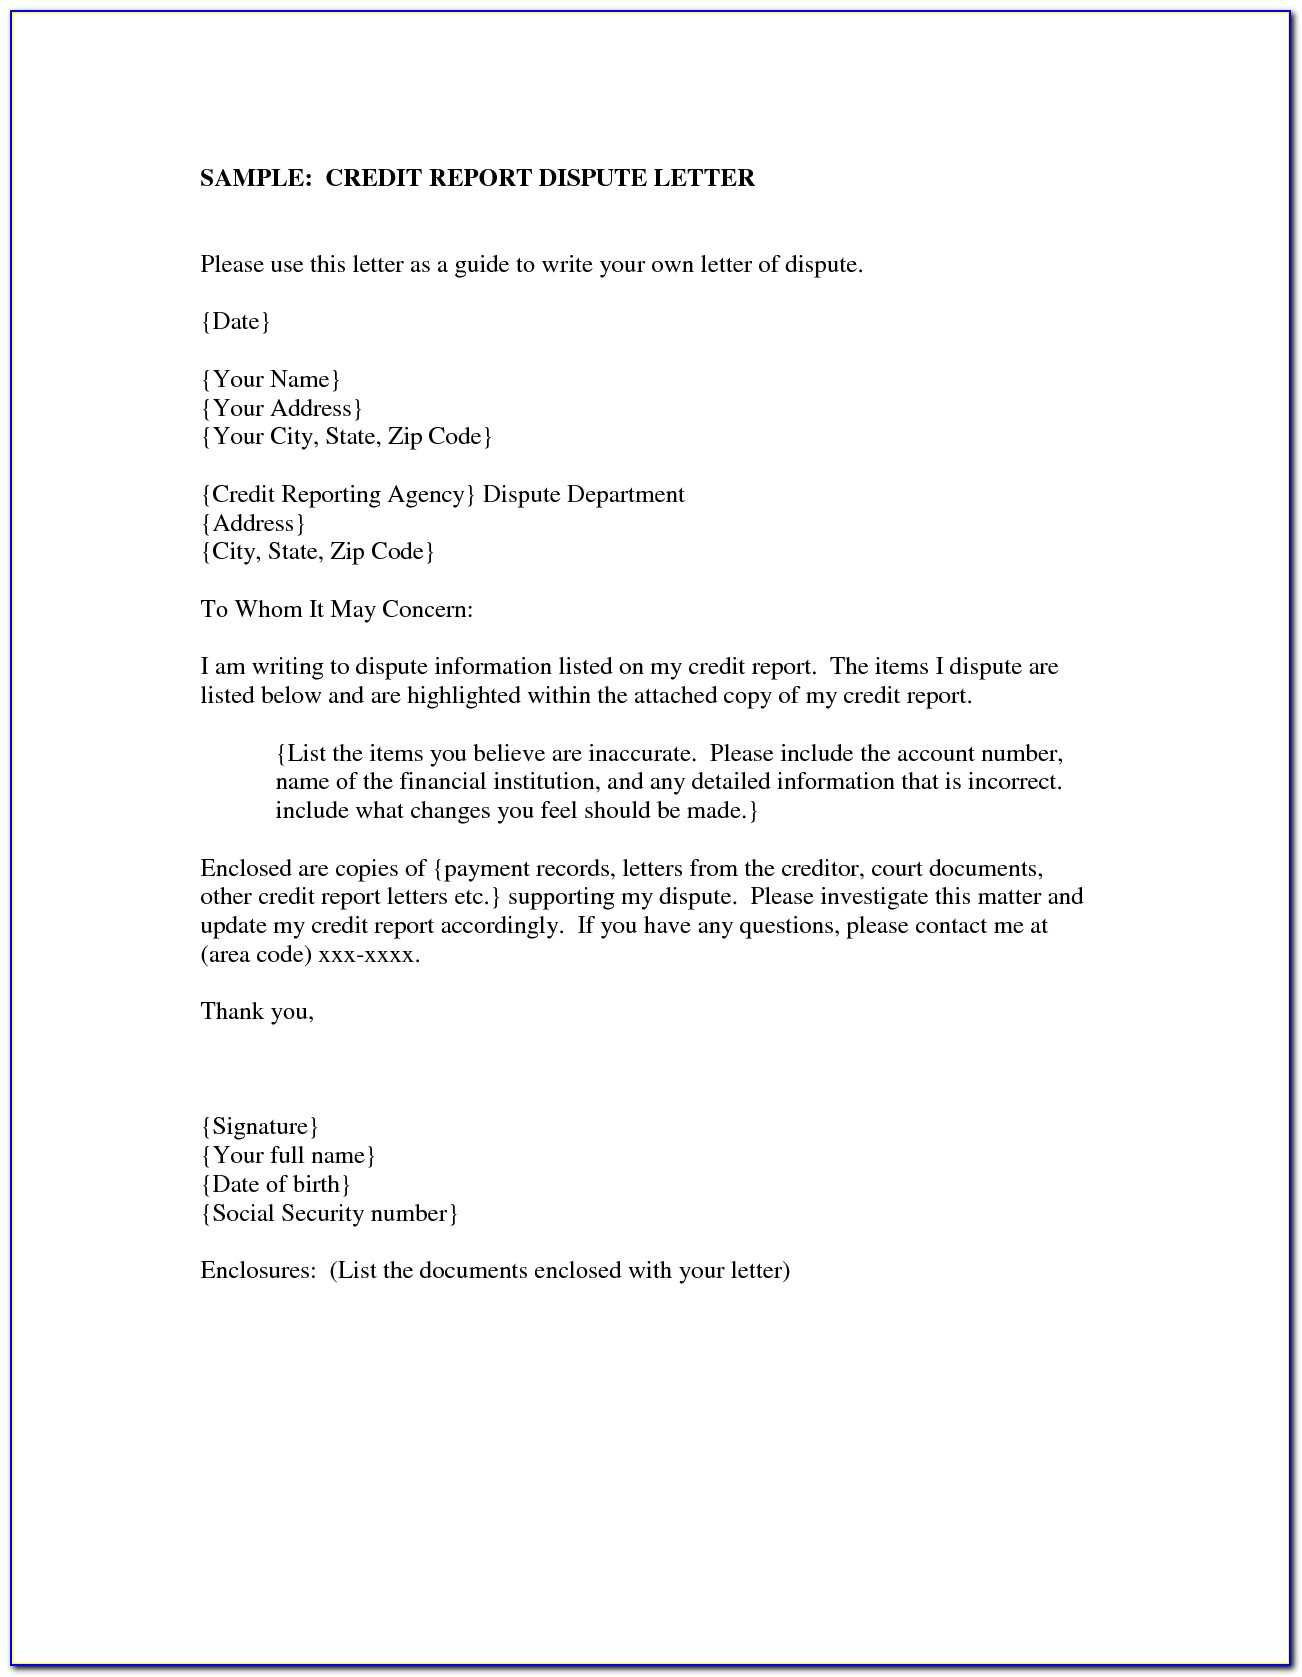 Dispute Credit Report Letter | | Best Business Template For Inside Dispute Letter To Creditor Template